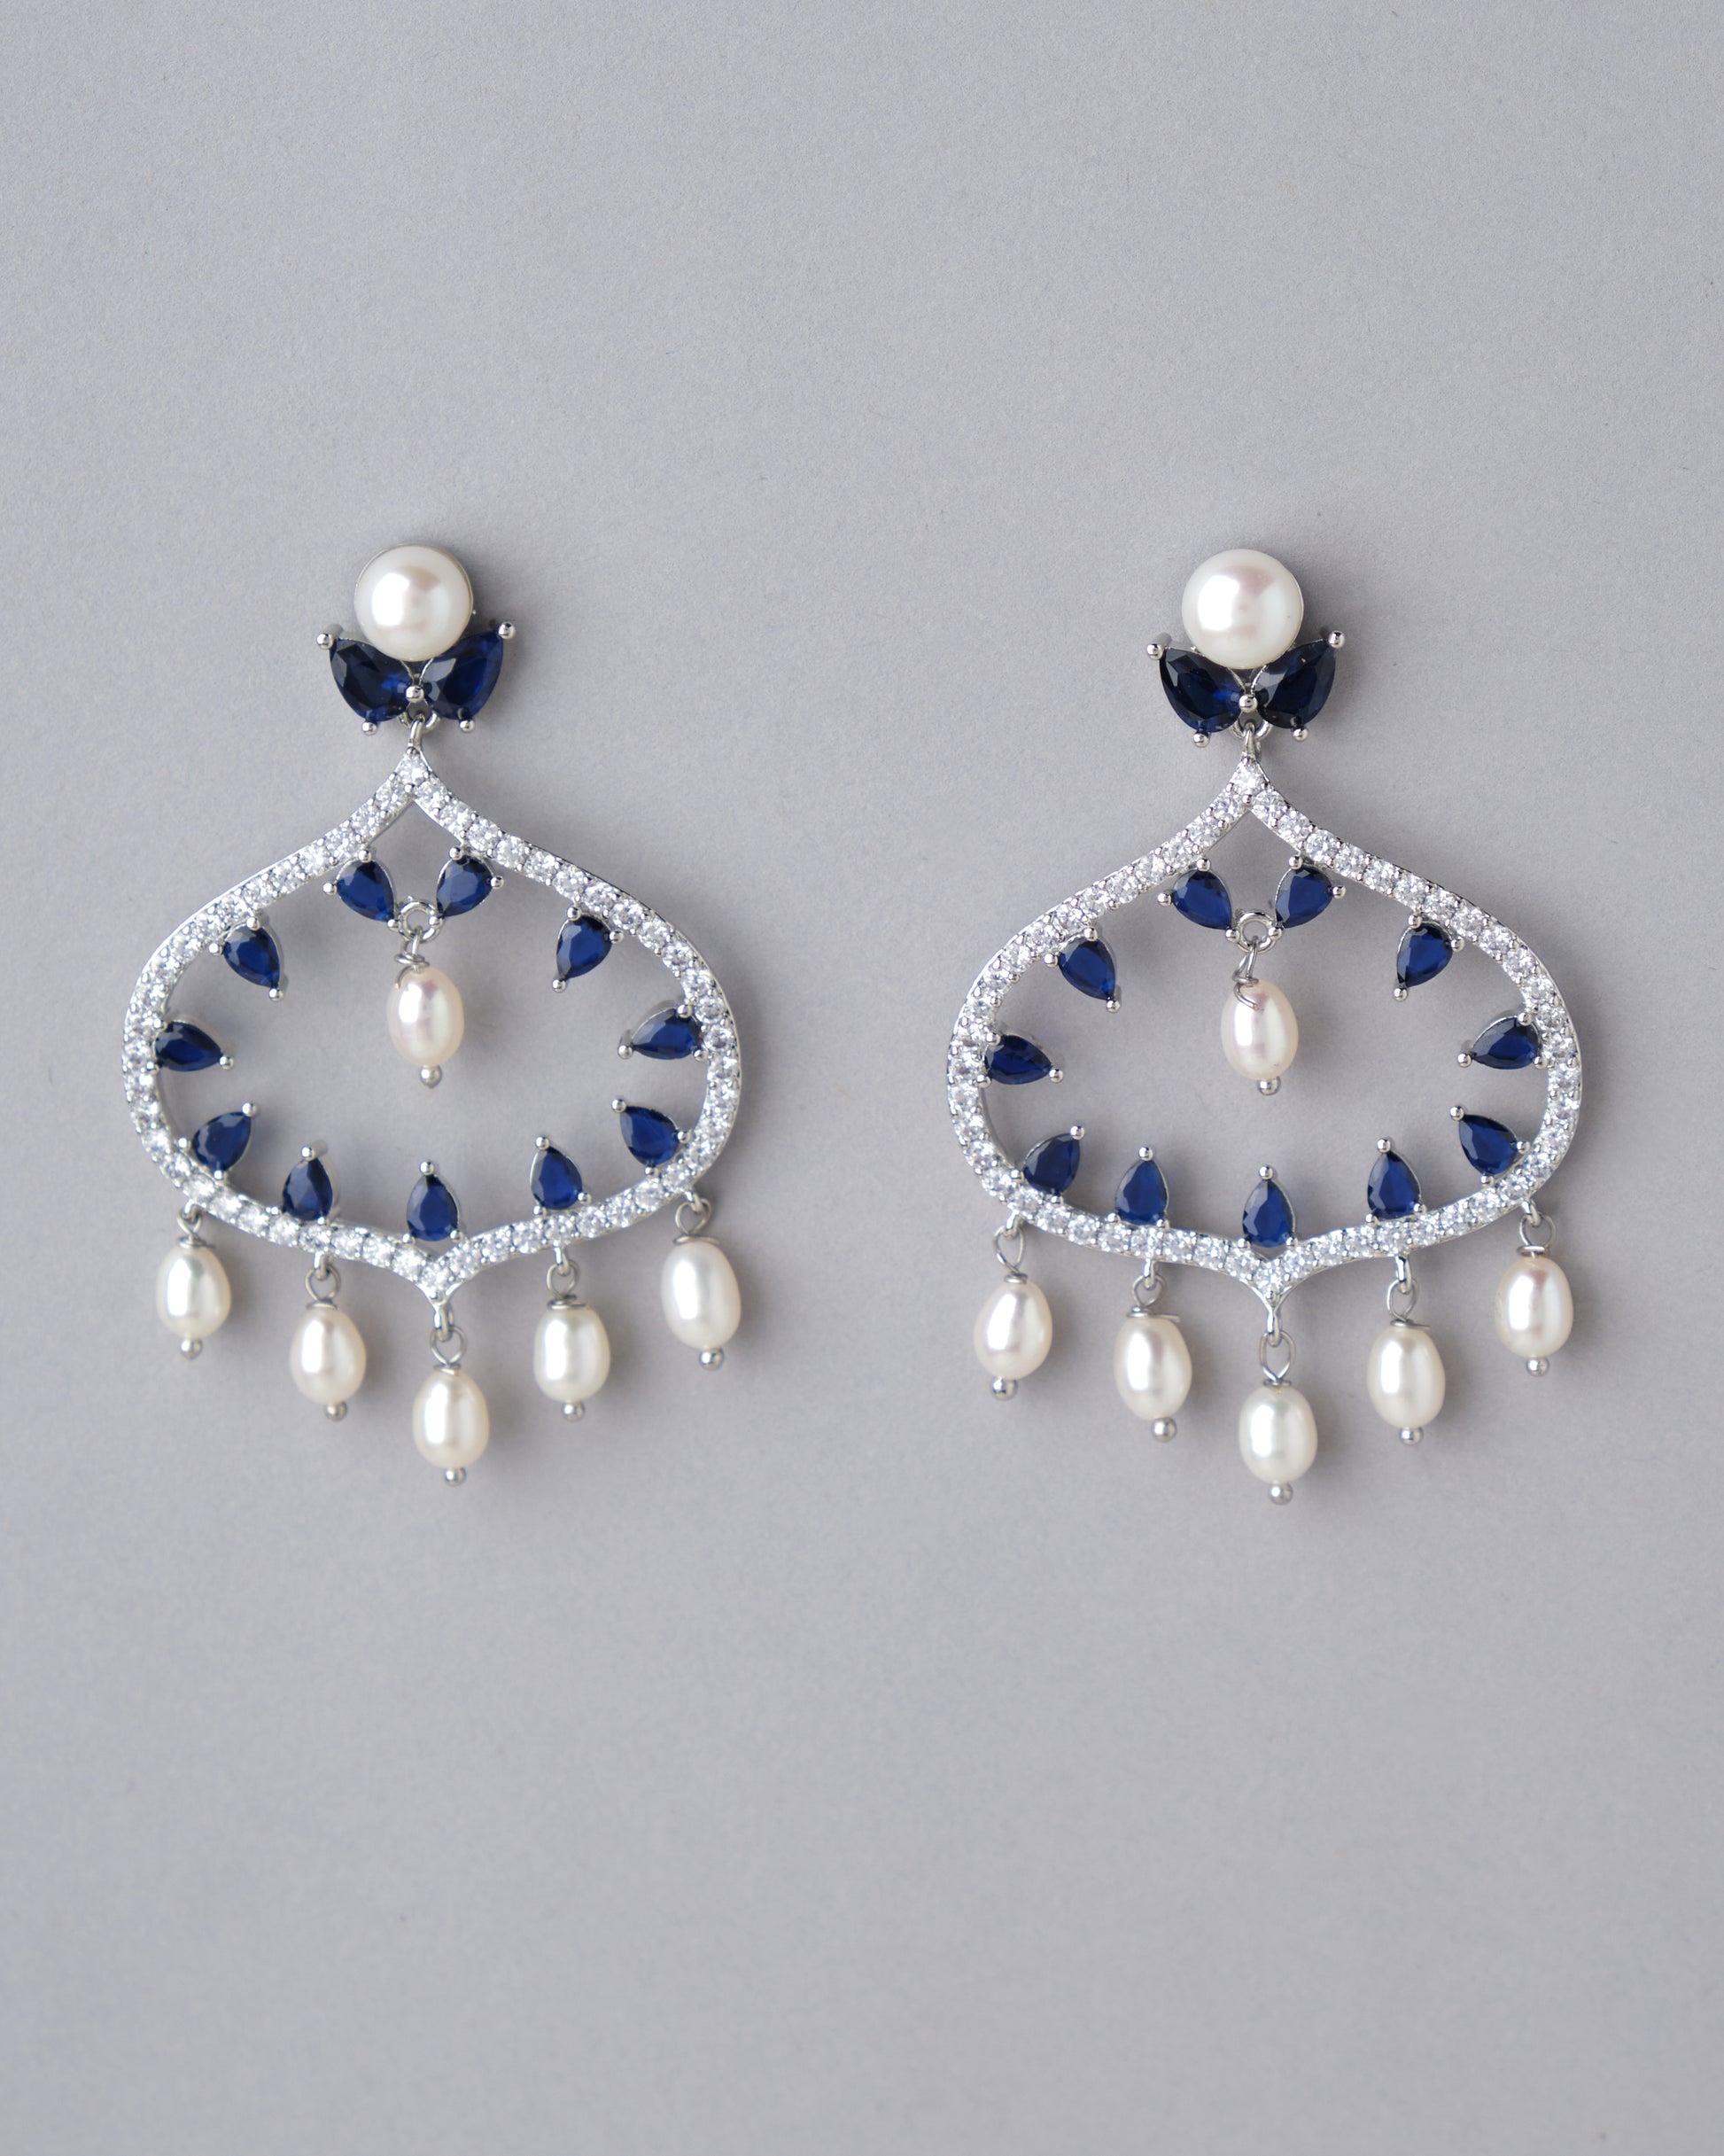 A pair of Ghazala Chand Bali Earrings by Chandrani Pearls with pearls.